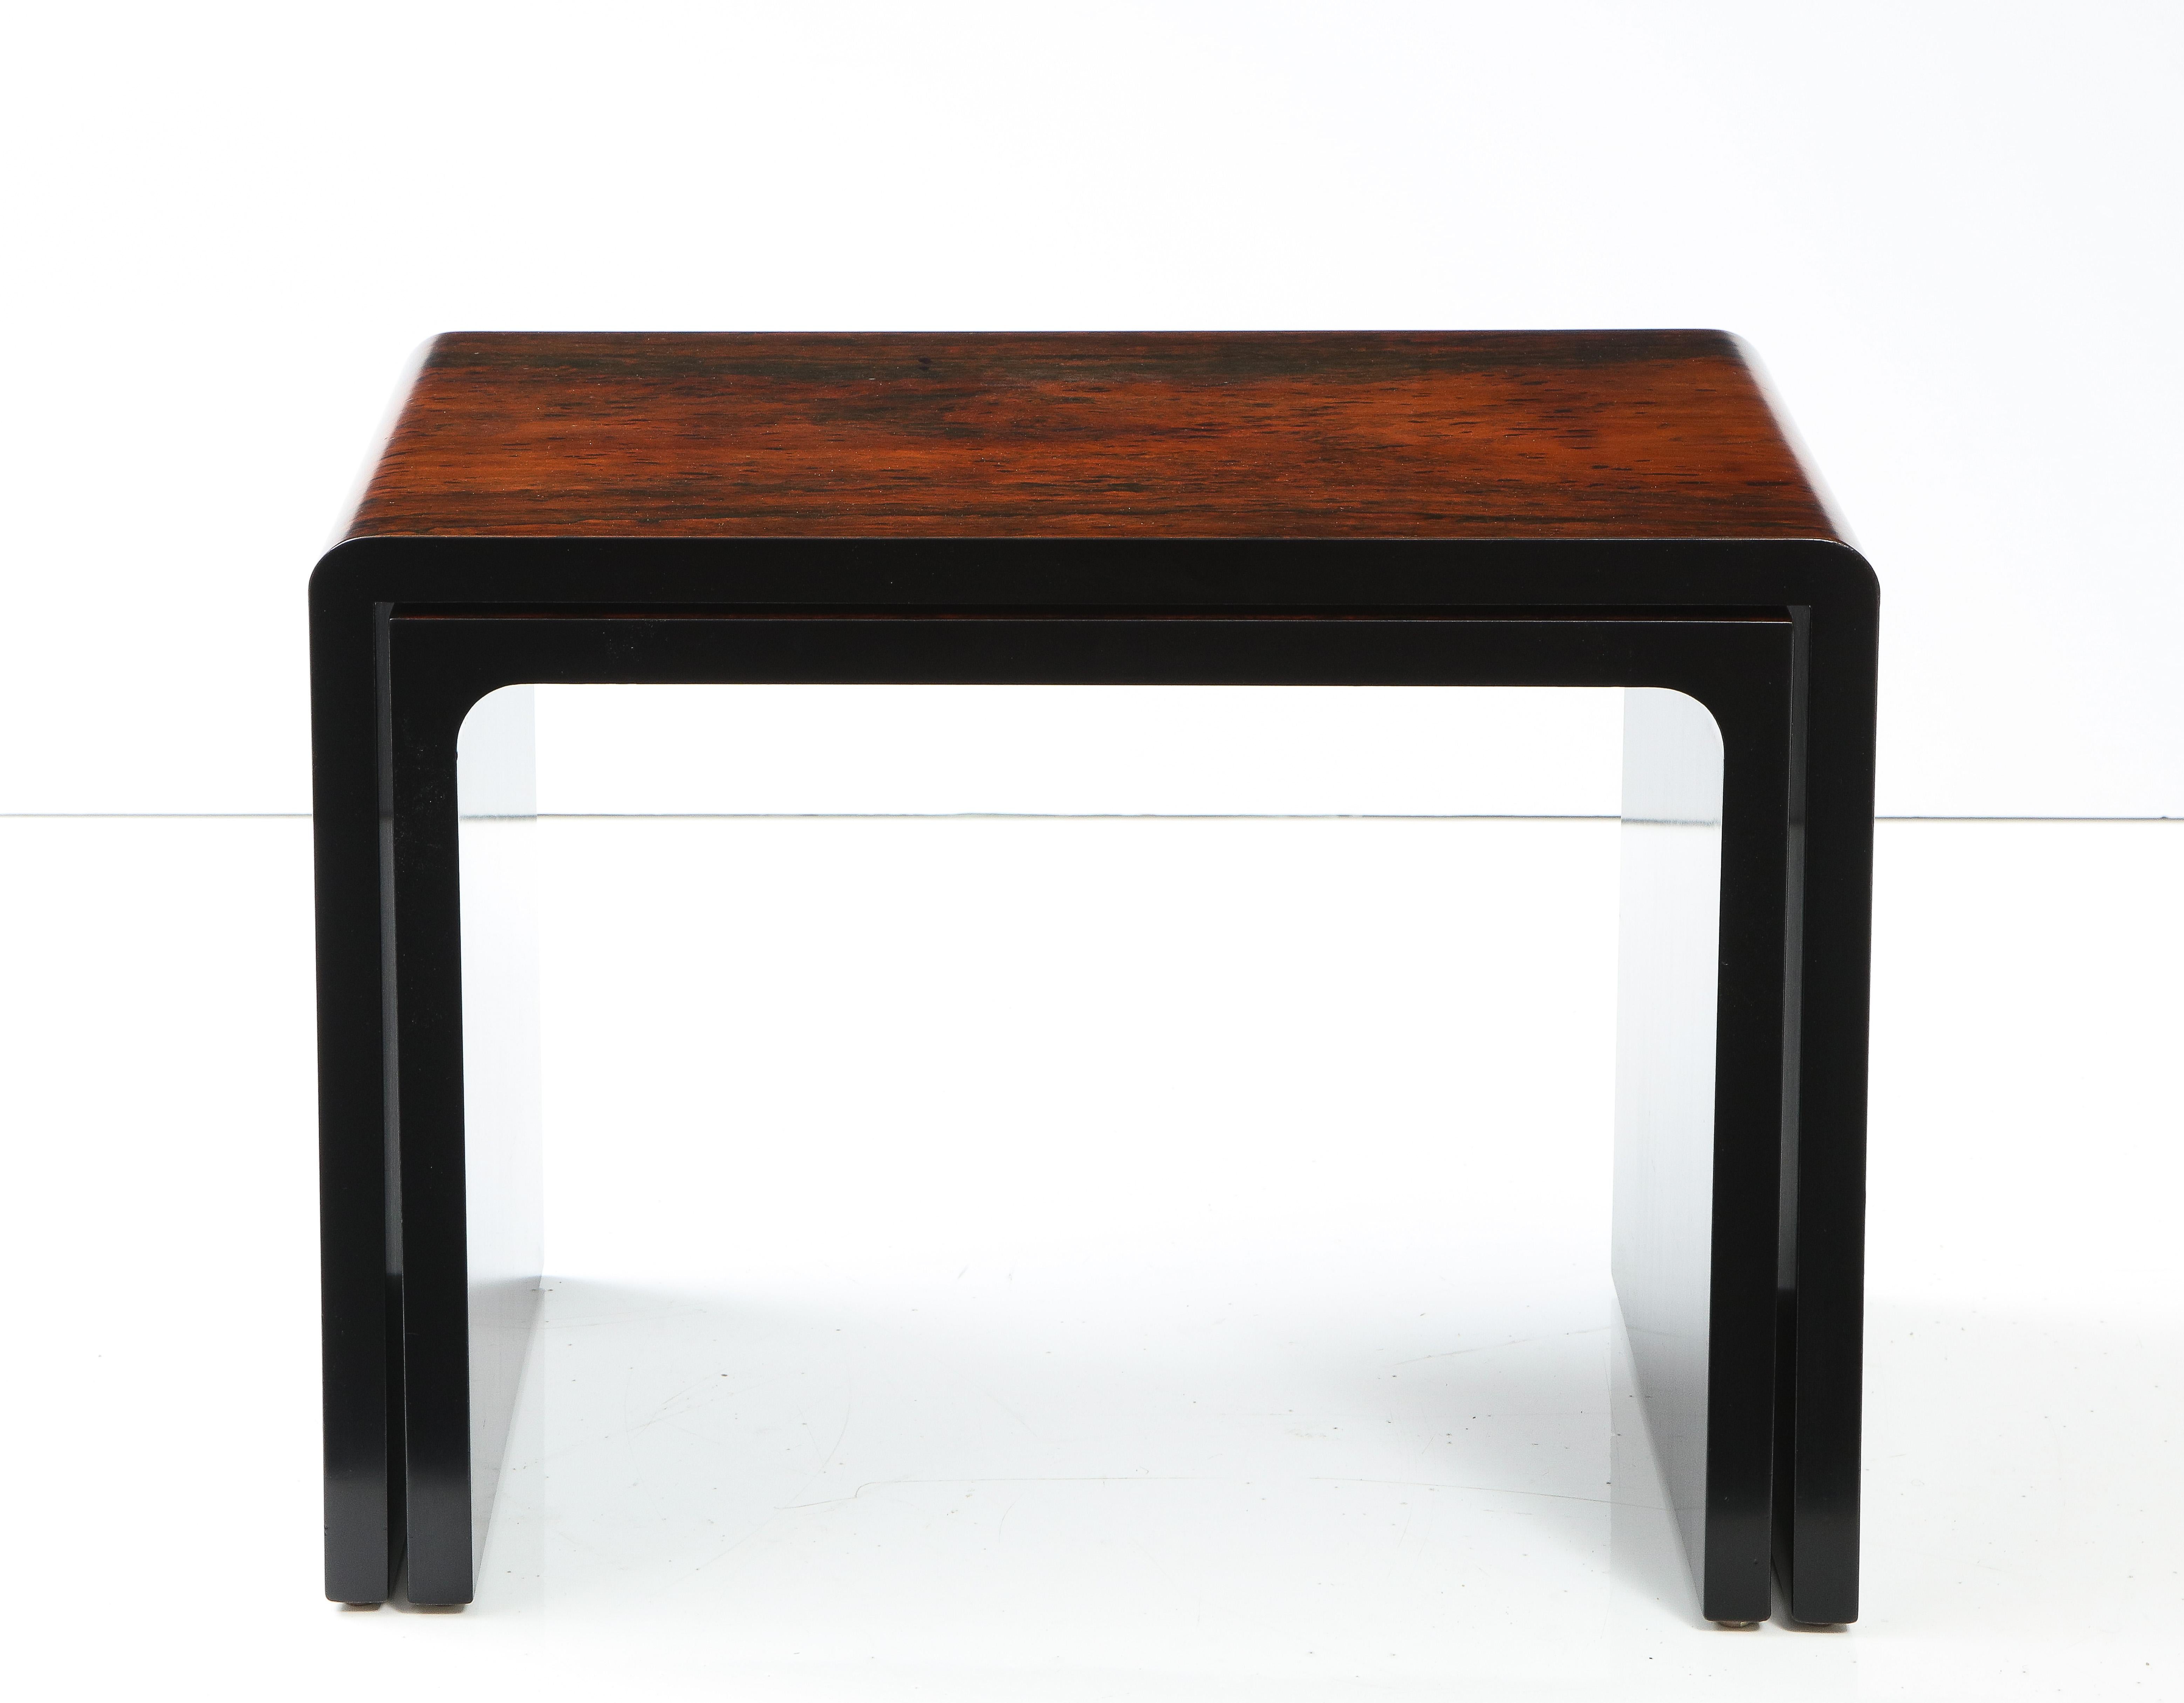 Set of Italian Rosewood and Ebony Lacquered Nesting Tables, circa 1970 In Good Condition For Sale In New York, NY